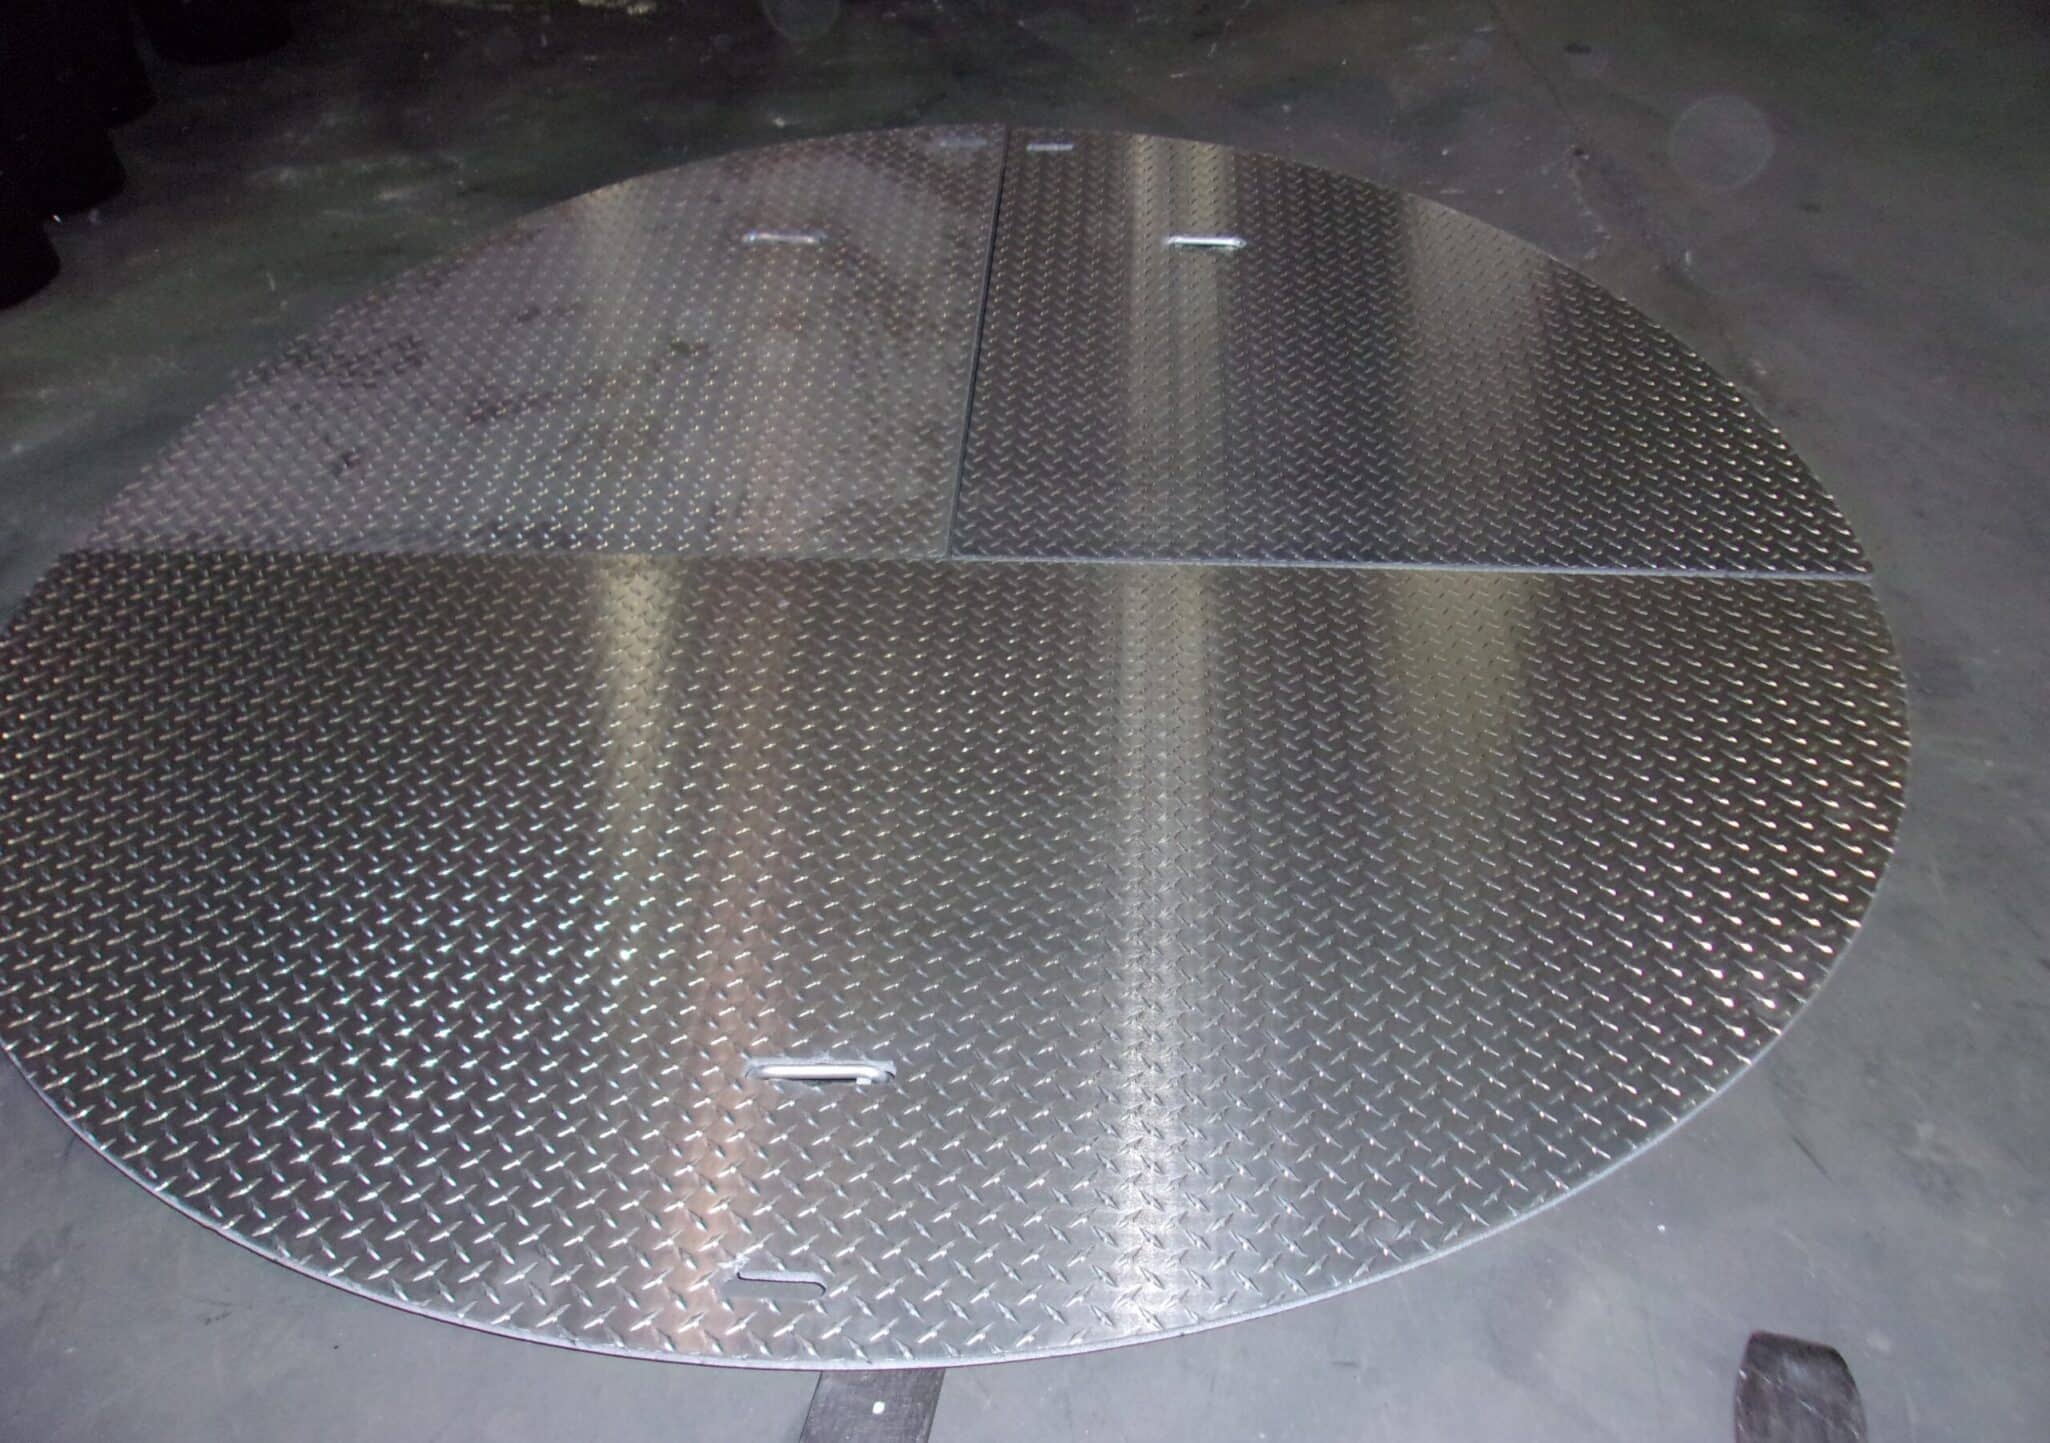 LARGE ROUND COVER IN 3 SECTIONS